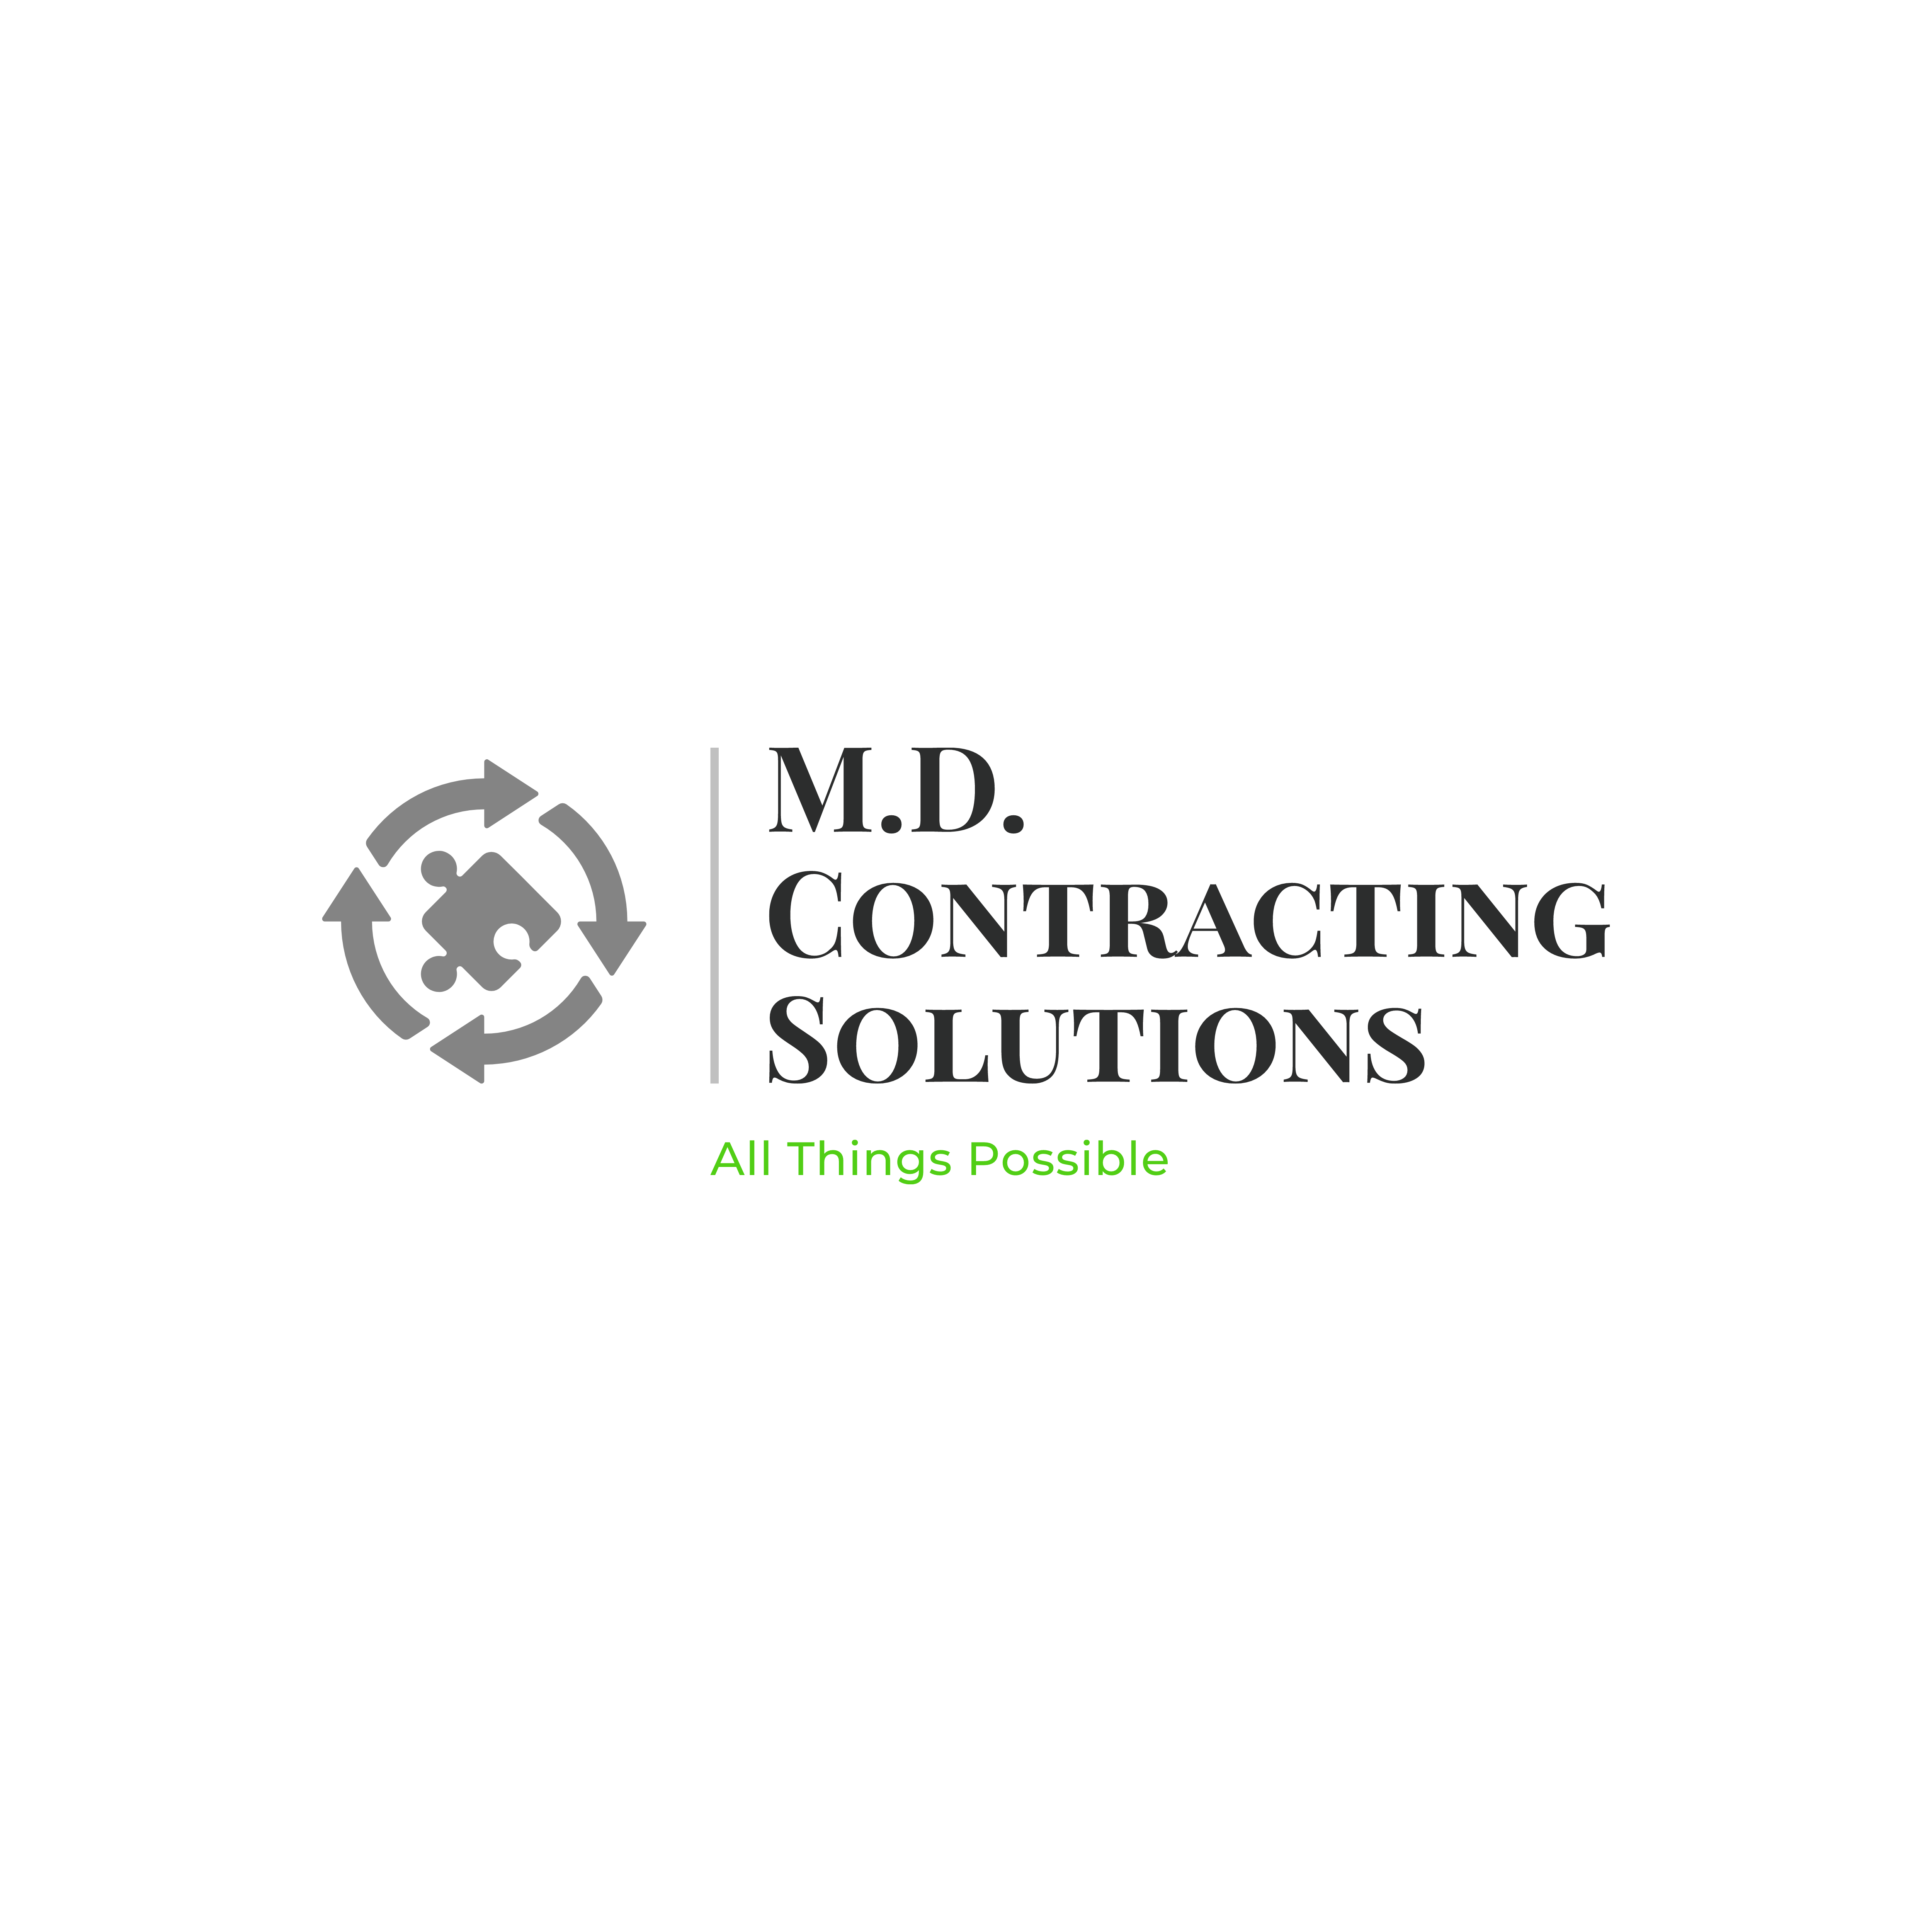 MD Contracting Solutions Logo